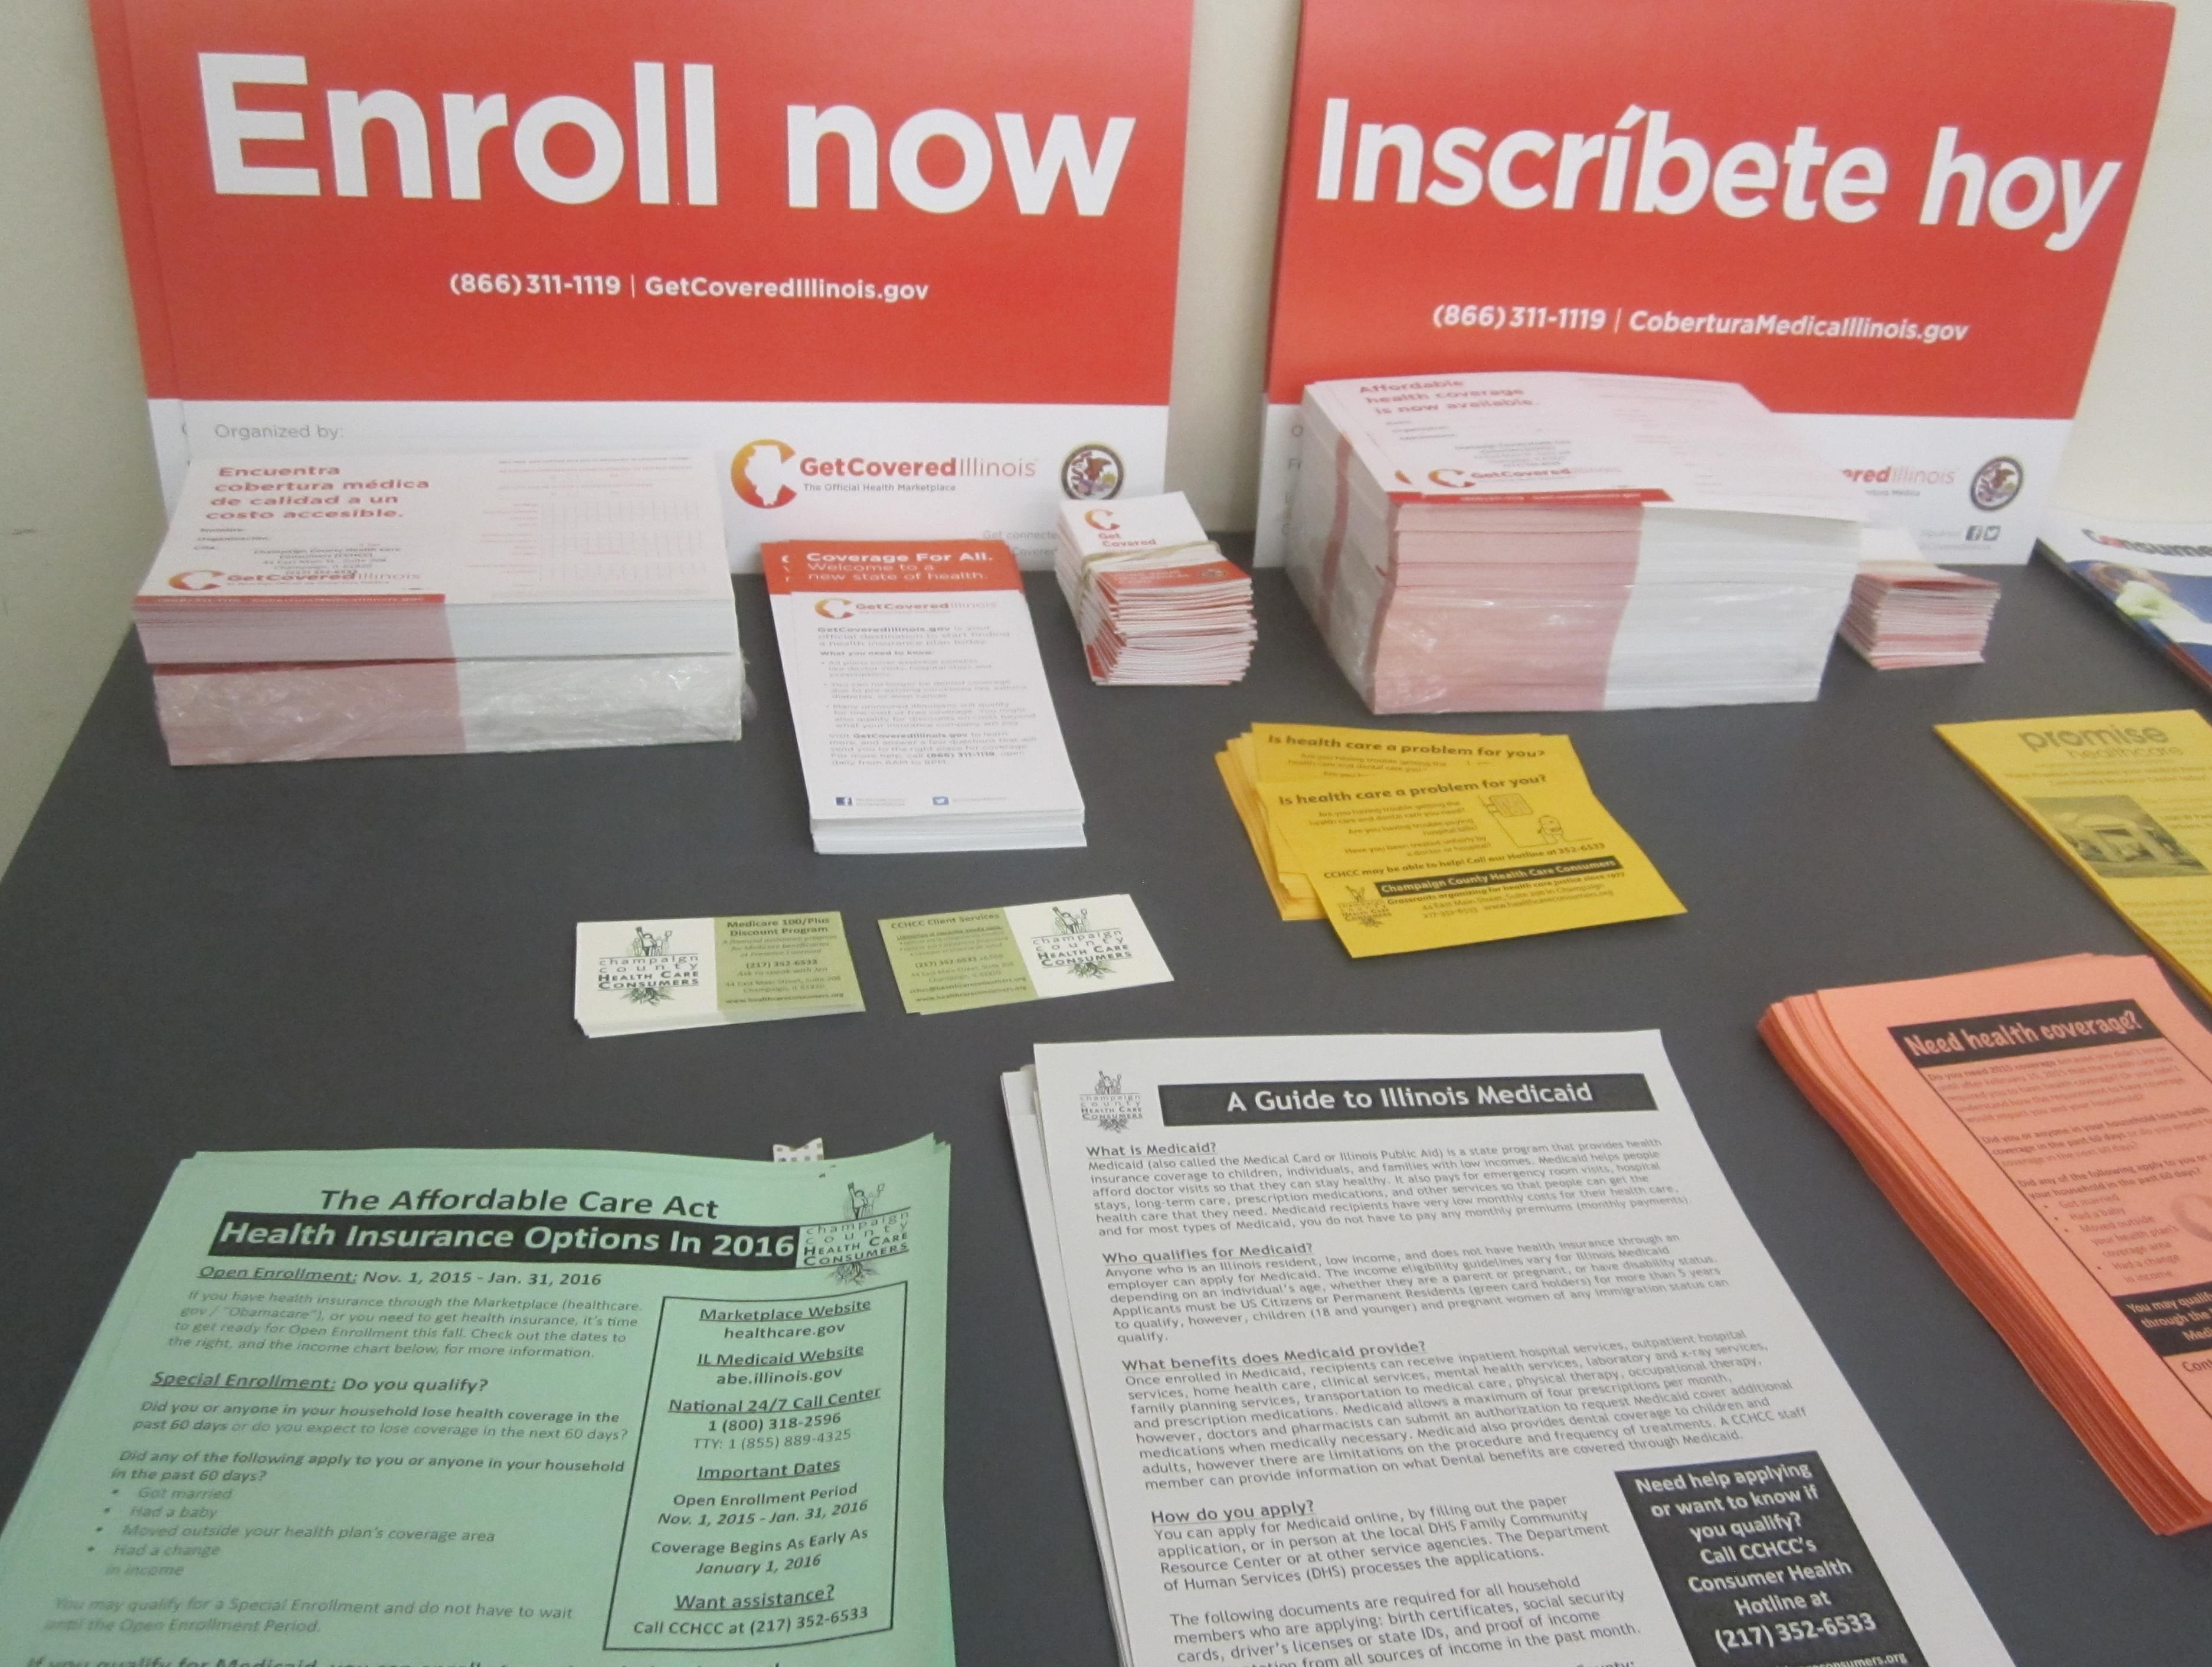 Literature on enrollment in the nation's health care law at Champaign County Health Care Consumers' office in downtown Champaign.